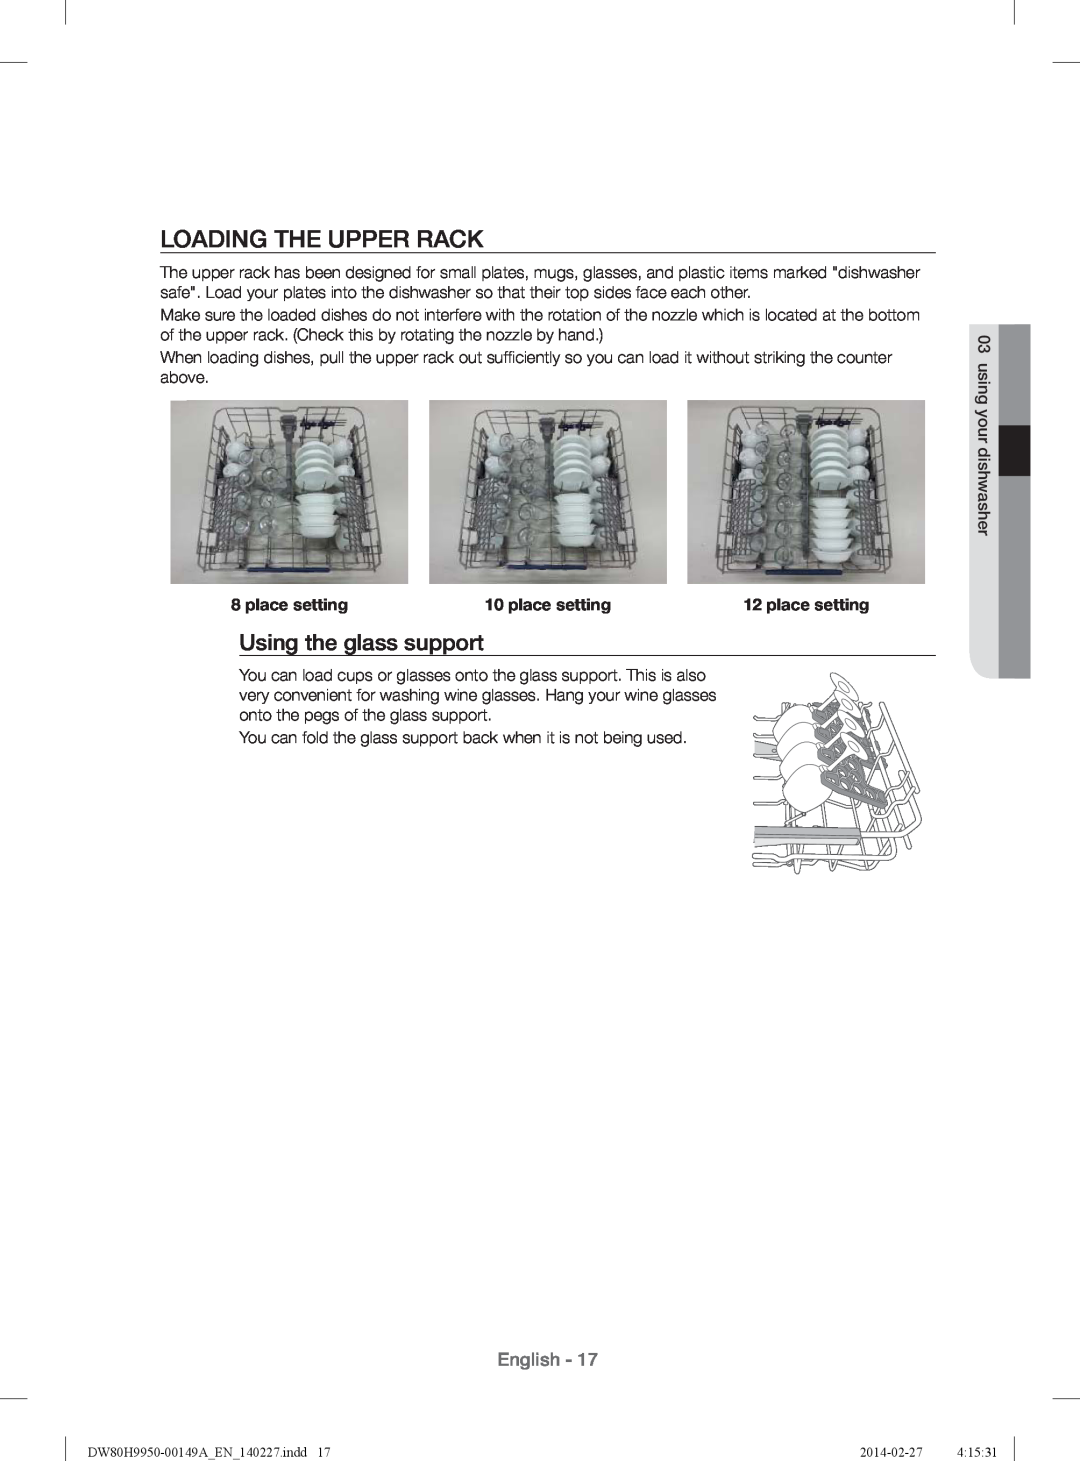 Samsung DW80H9930US user manual Loading The Upper Rack, Using the glass support, English, place setting 